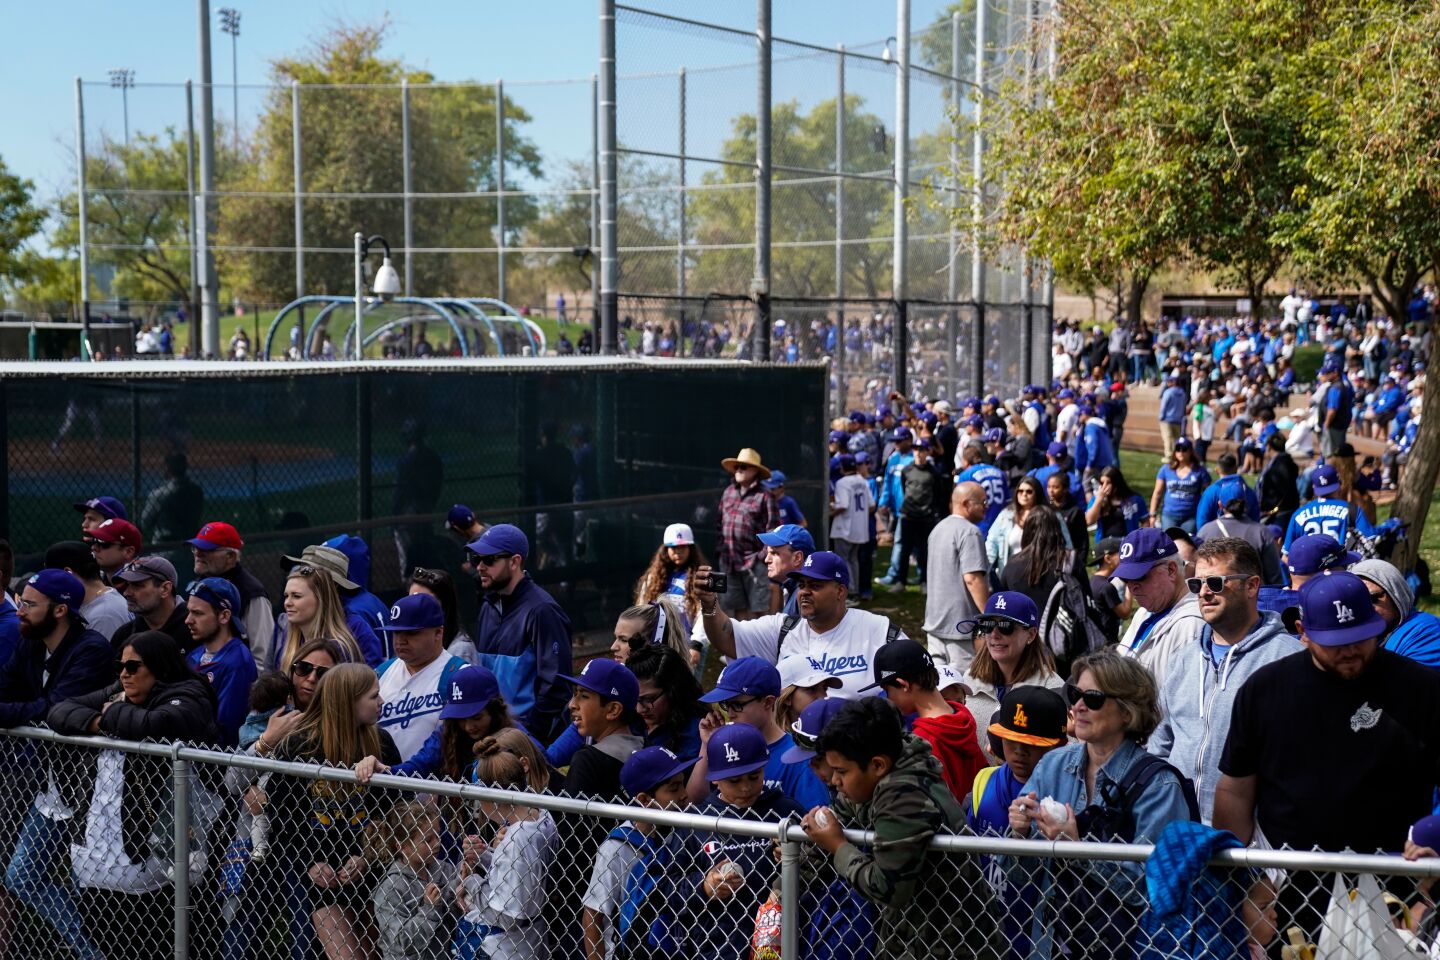 Fans try to catch a glimpse of the Dodgers during batting practice at Camelback Ranch before an exhibition game against the Chicago Cubs on Feb. 23, 2020.